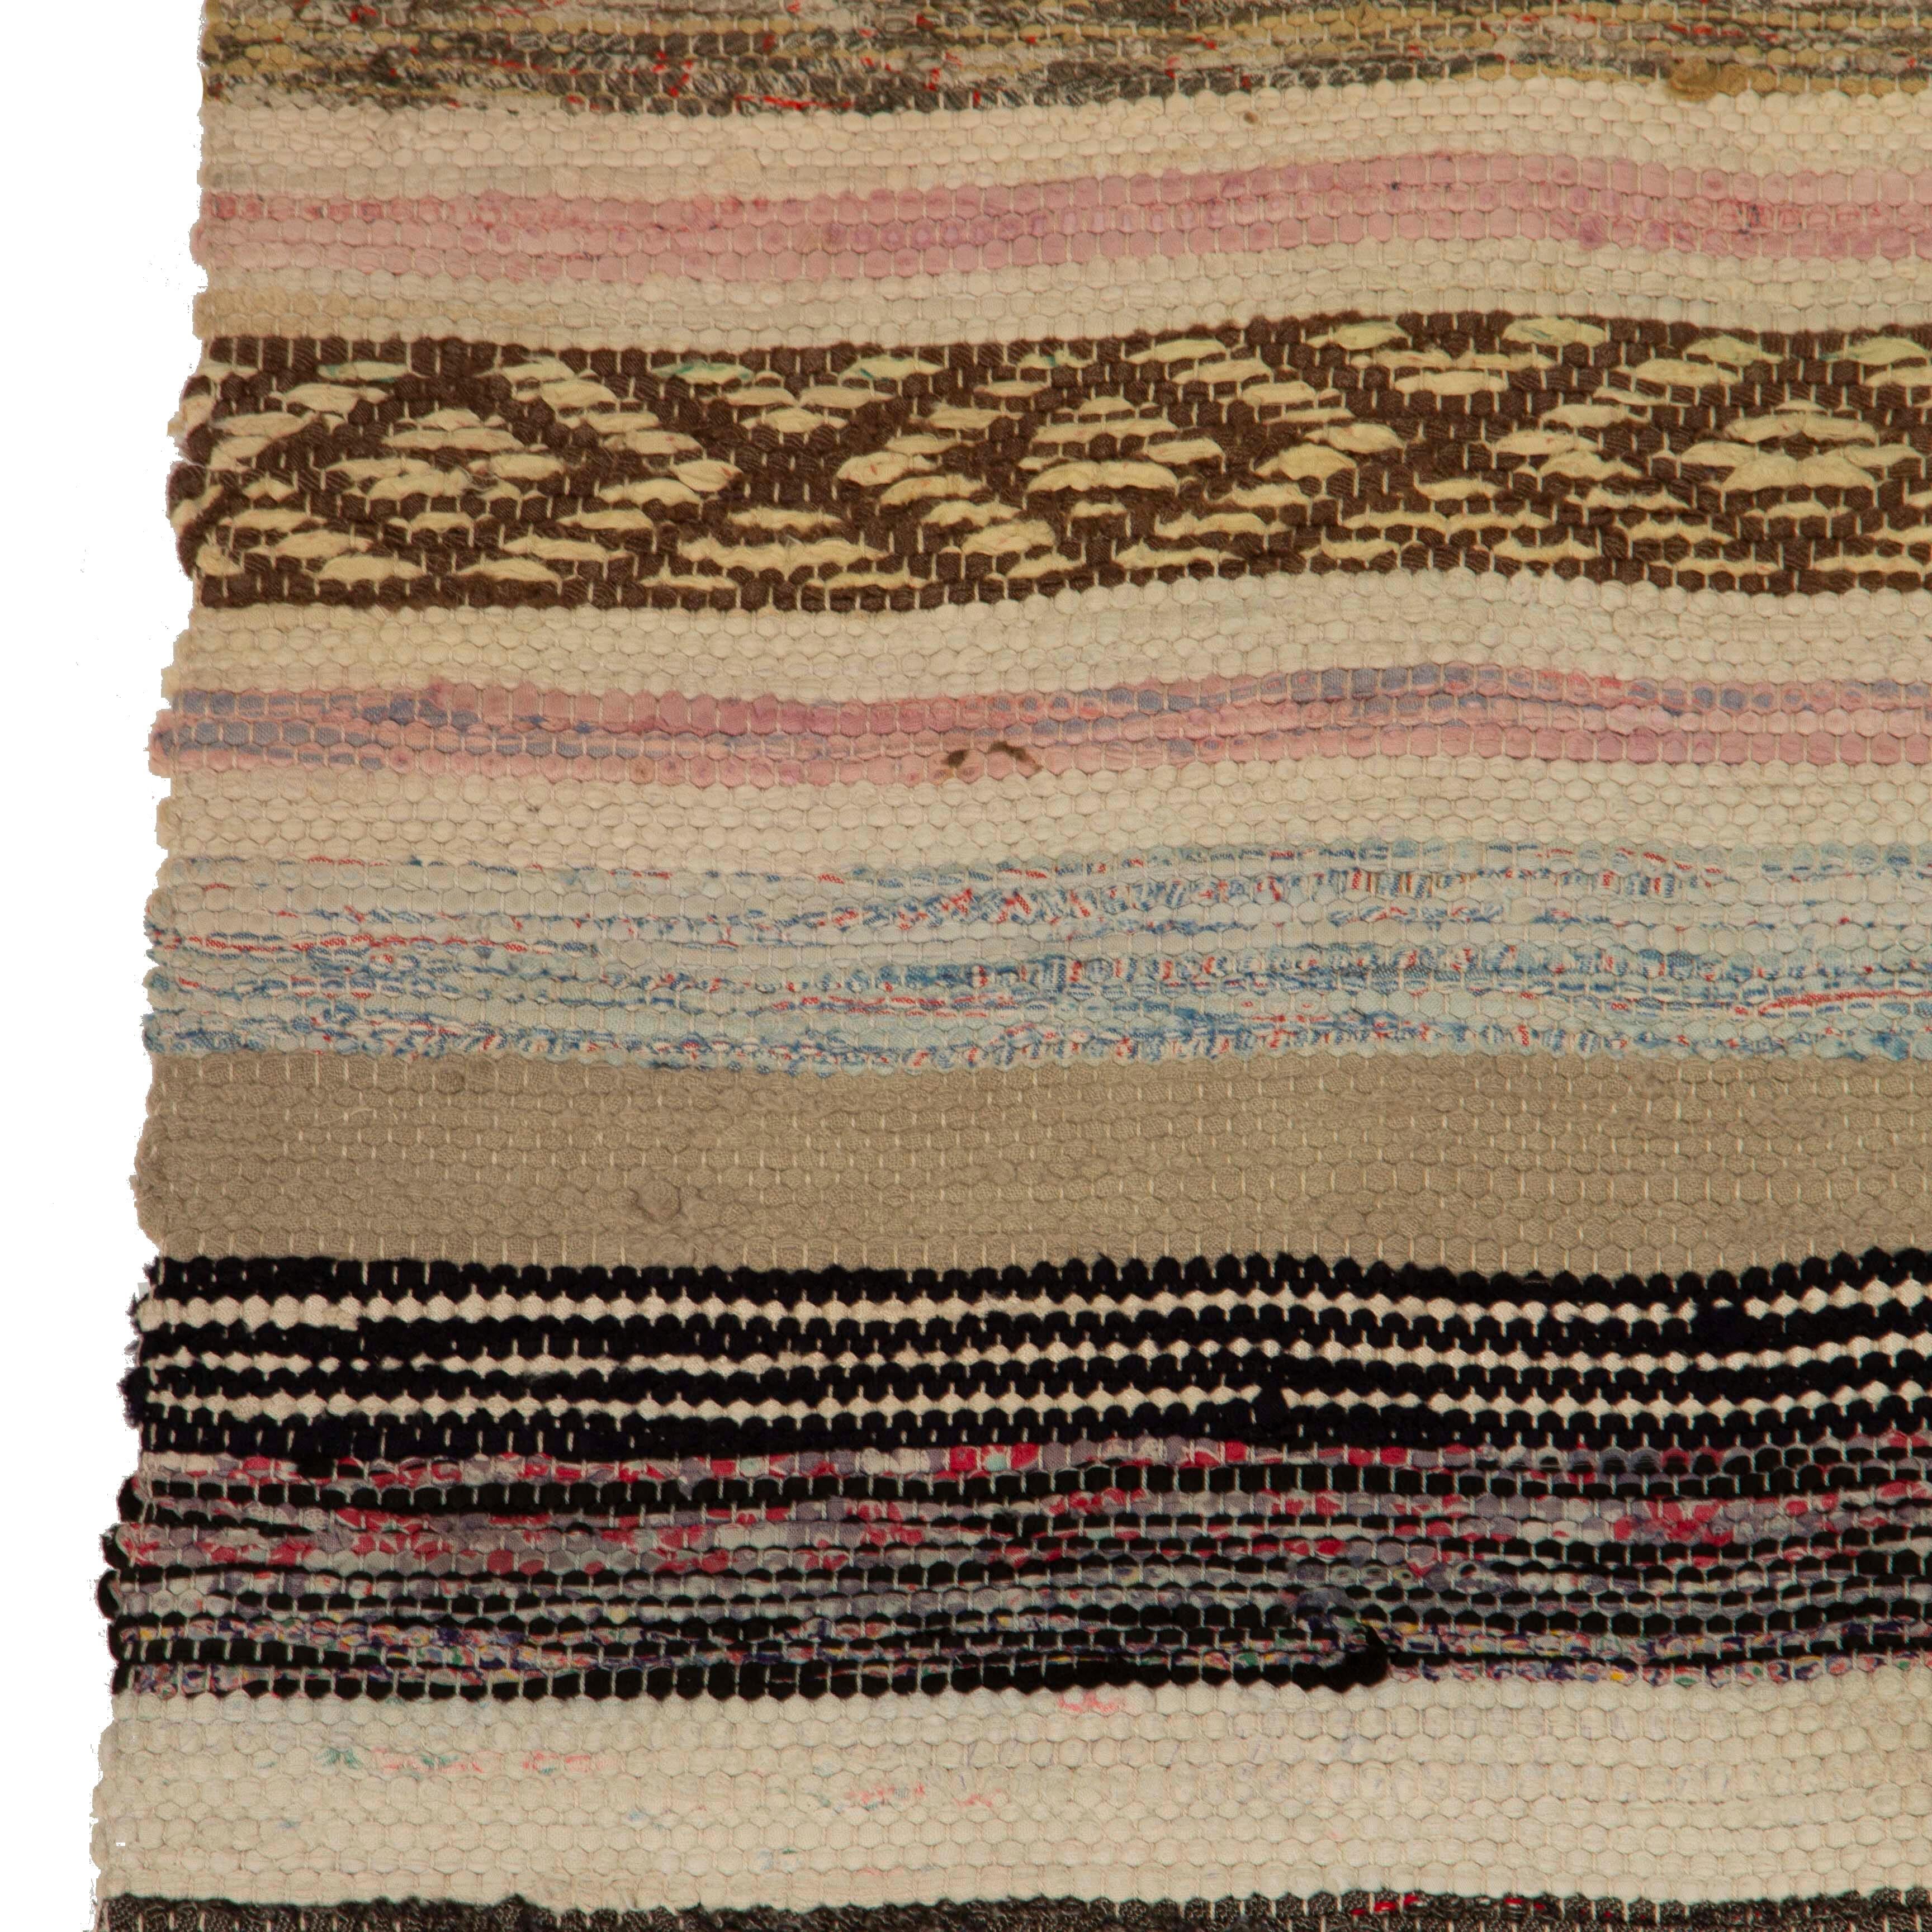 Swedish handwoven rug, circa 1940-50. This rug has a long and thin form, ideal for use as a runner. It features a densely striped design in attractive shades of blue, black, and pale green. Washable in cold water.
RT6017439.